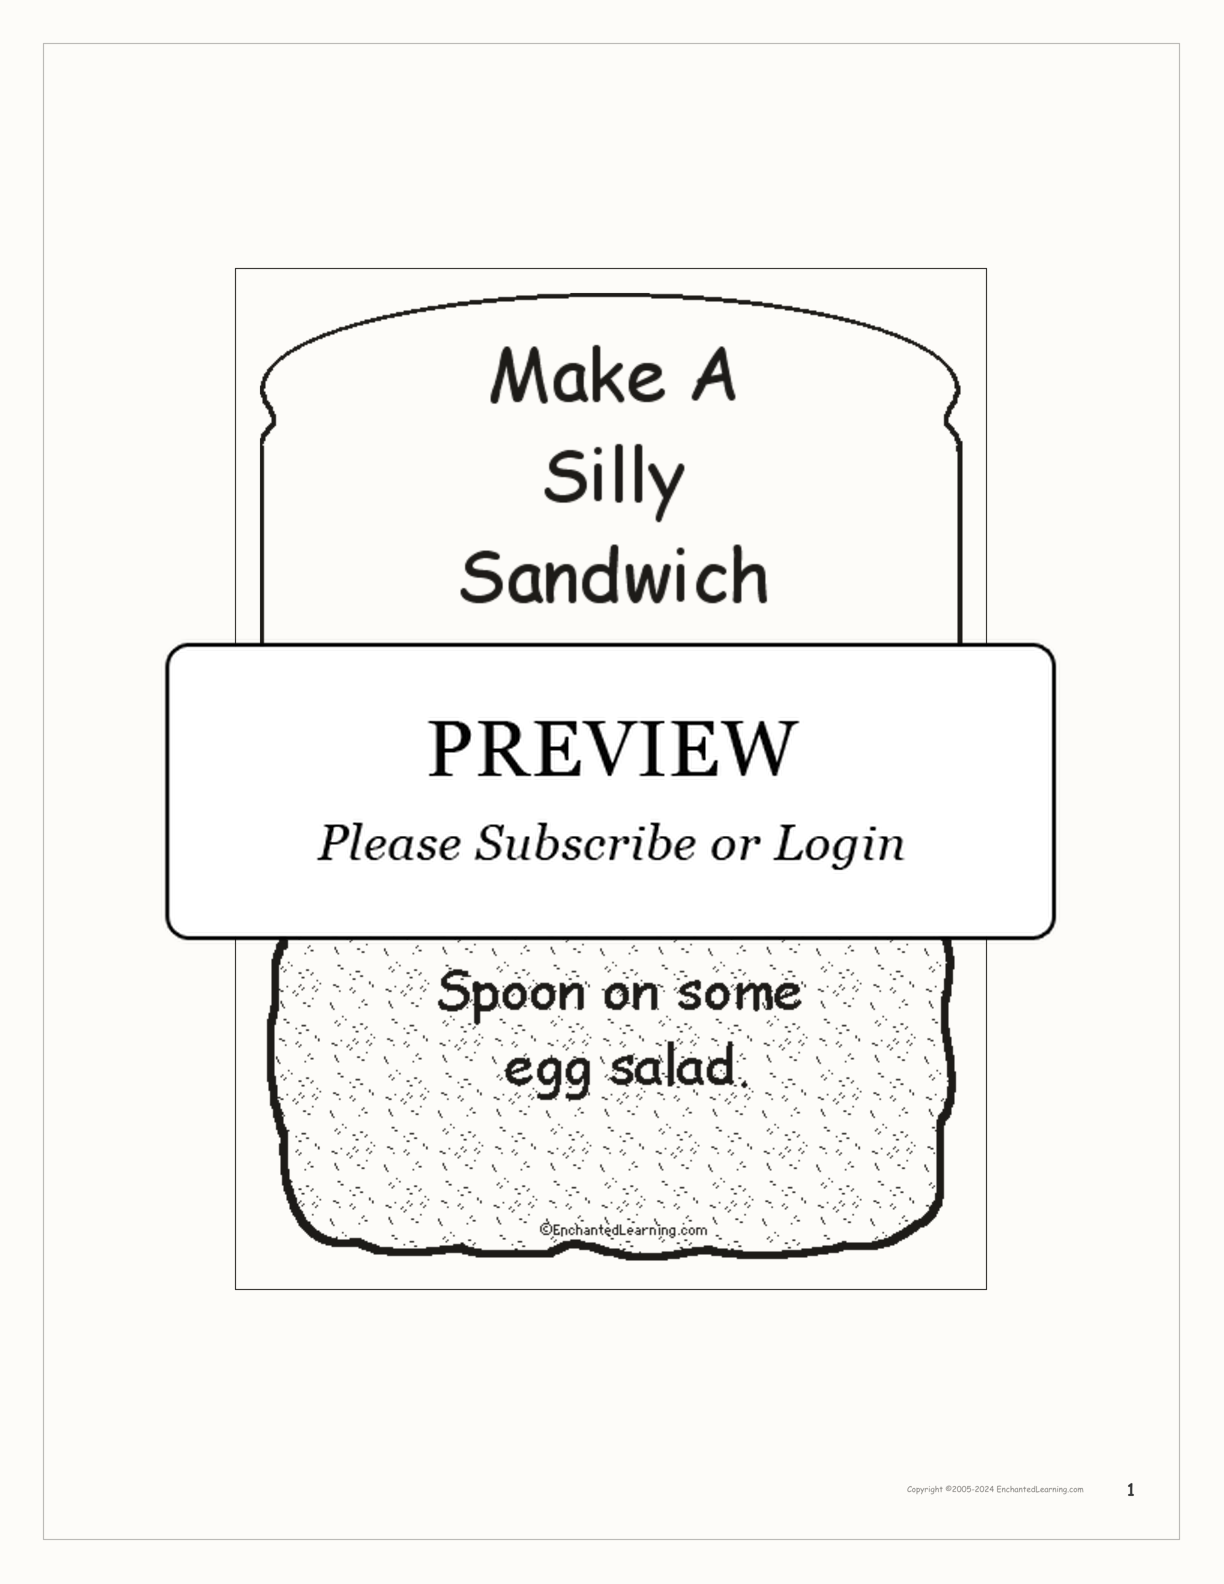 'Make a Silly Sandwich' Book interactive printout page 1